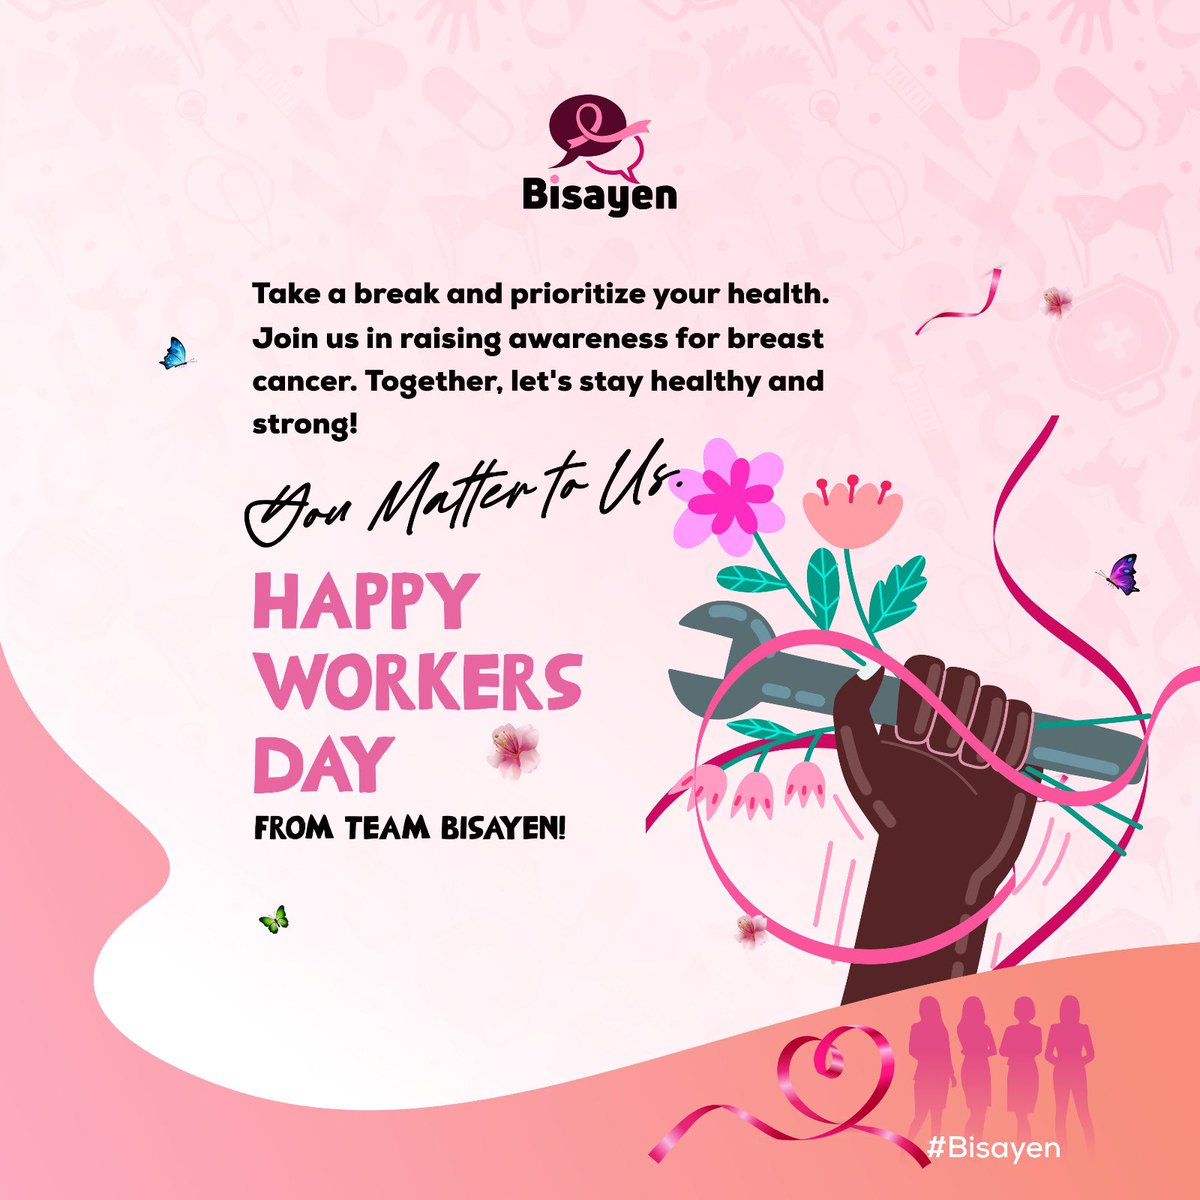 Health they say is wealth. Prioritize your health, talk to your doctor today about your breast health and remember to report changes to your breast.Bisayen is here to support you all the way.Have an amazing workers day. #breastcancerawareness #BisayenAskUsTouchUs #bebreastaware💕